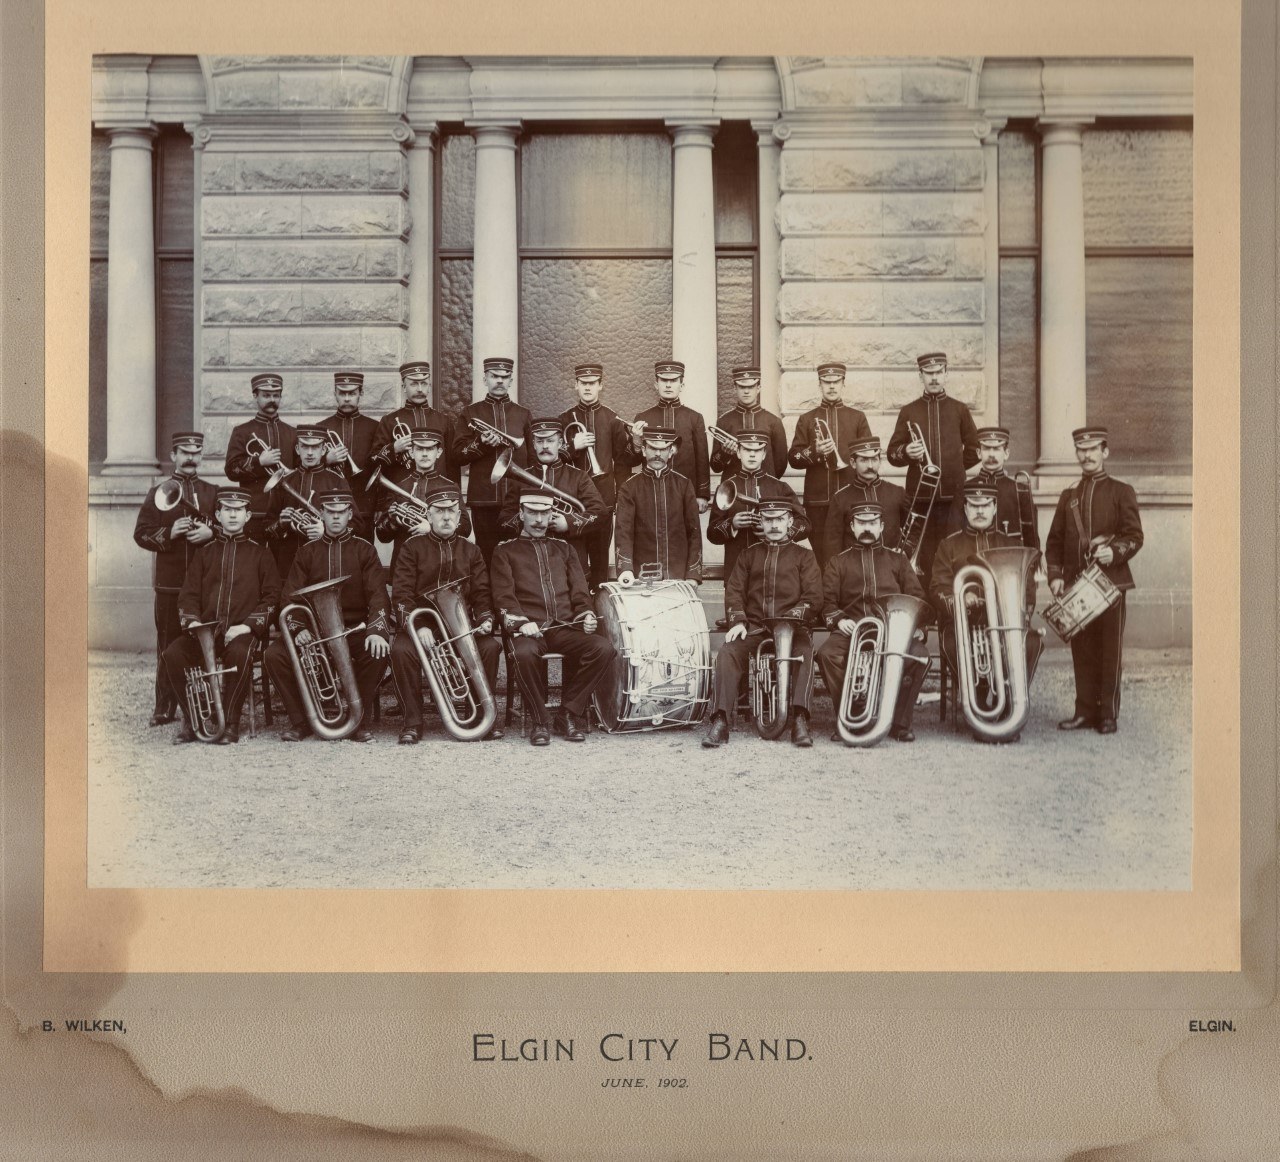 Picture of Elgin City Band in 1902